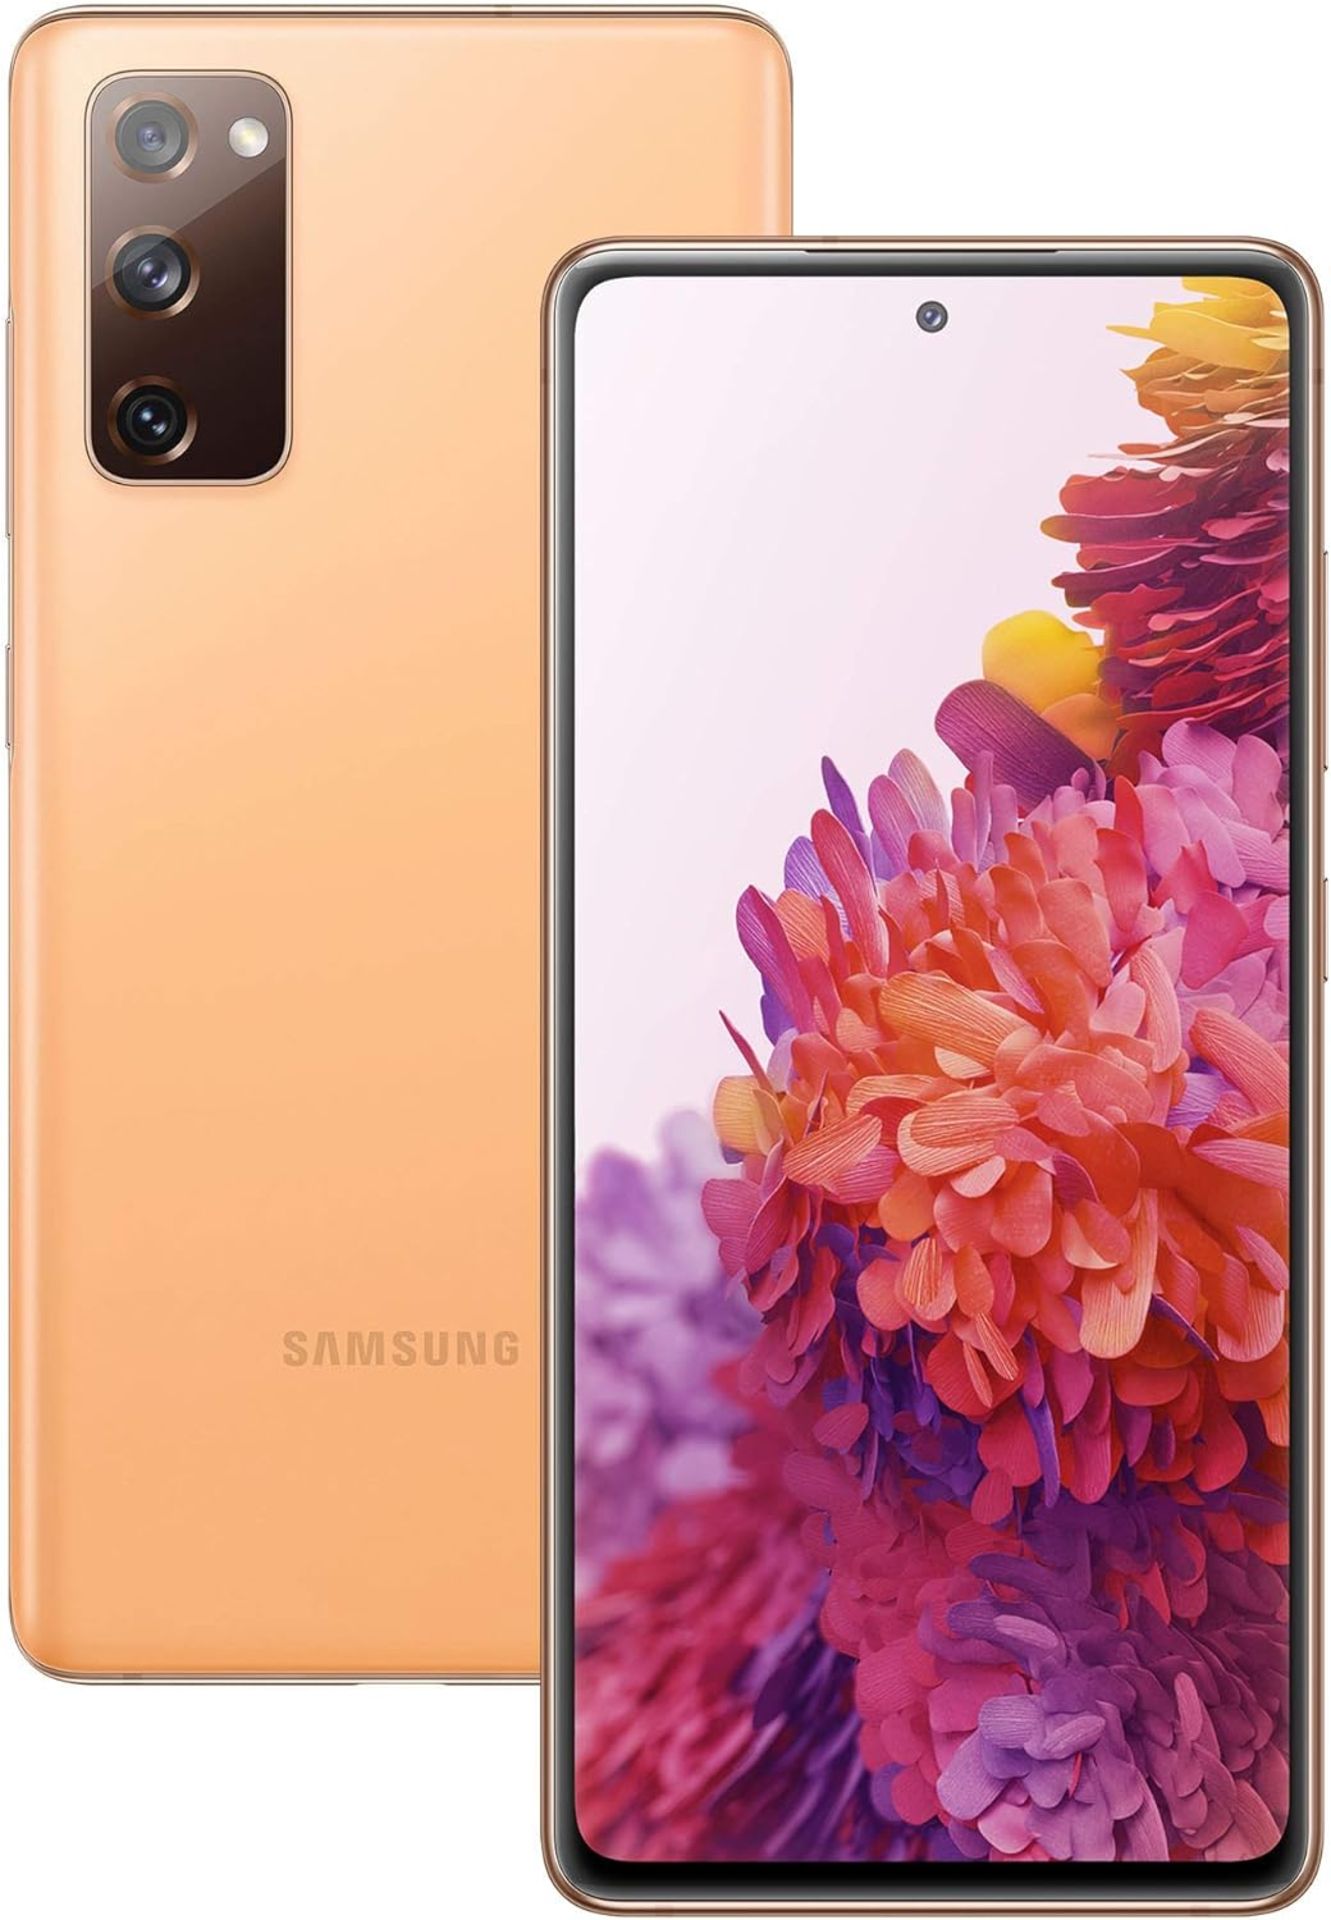 GRADE A SAMSUNG Galaxy S20 FE 5G - CLOUD ORANGE. RRP £199. The Galaxy S20 FE is as bold on the